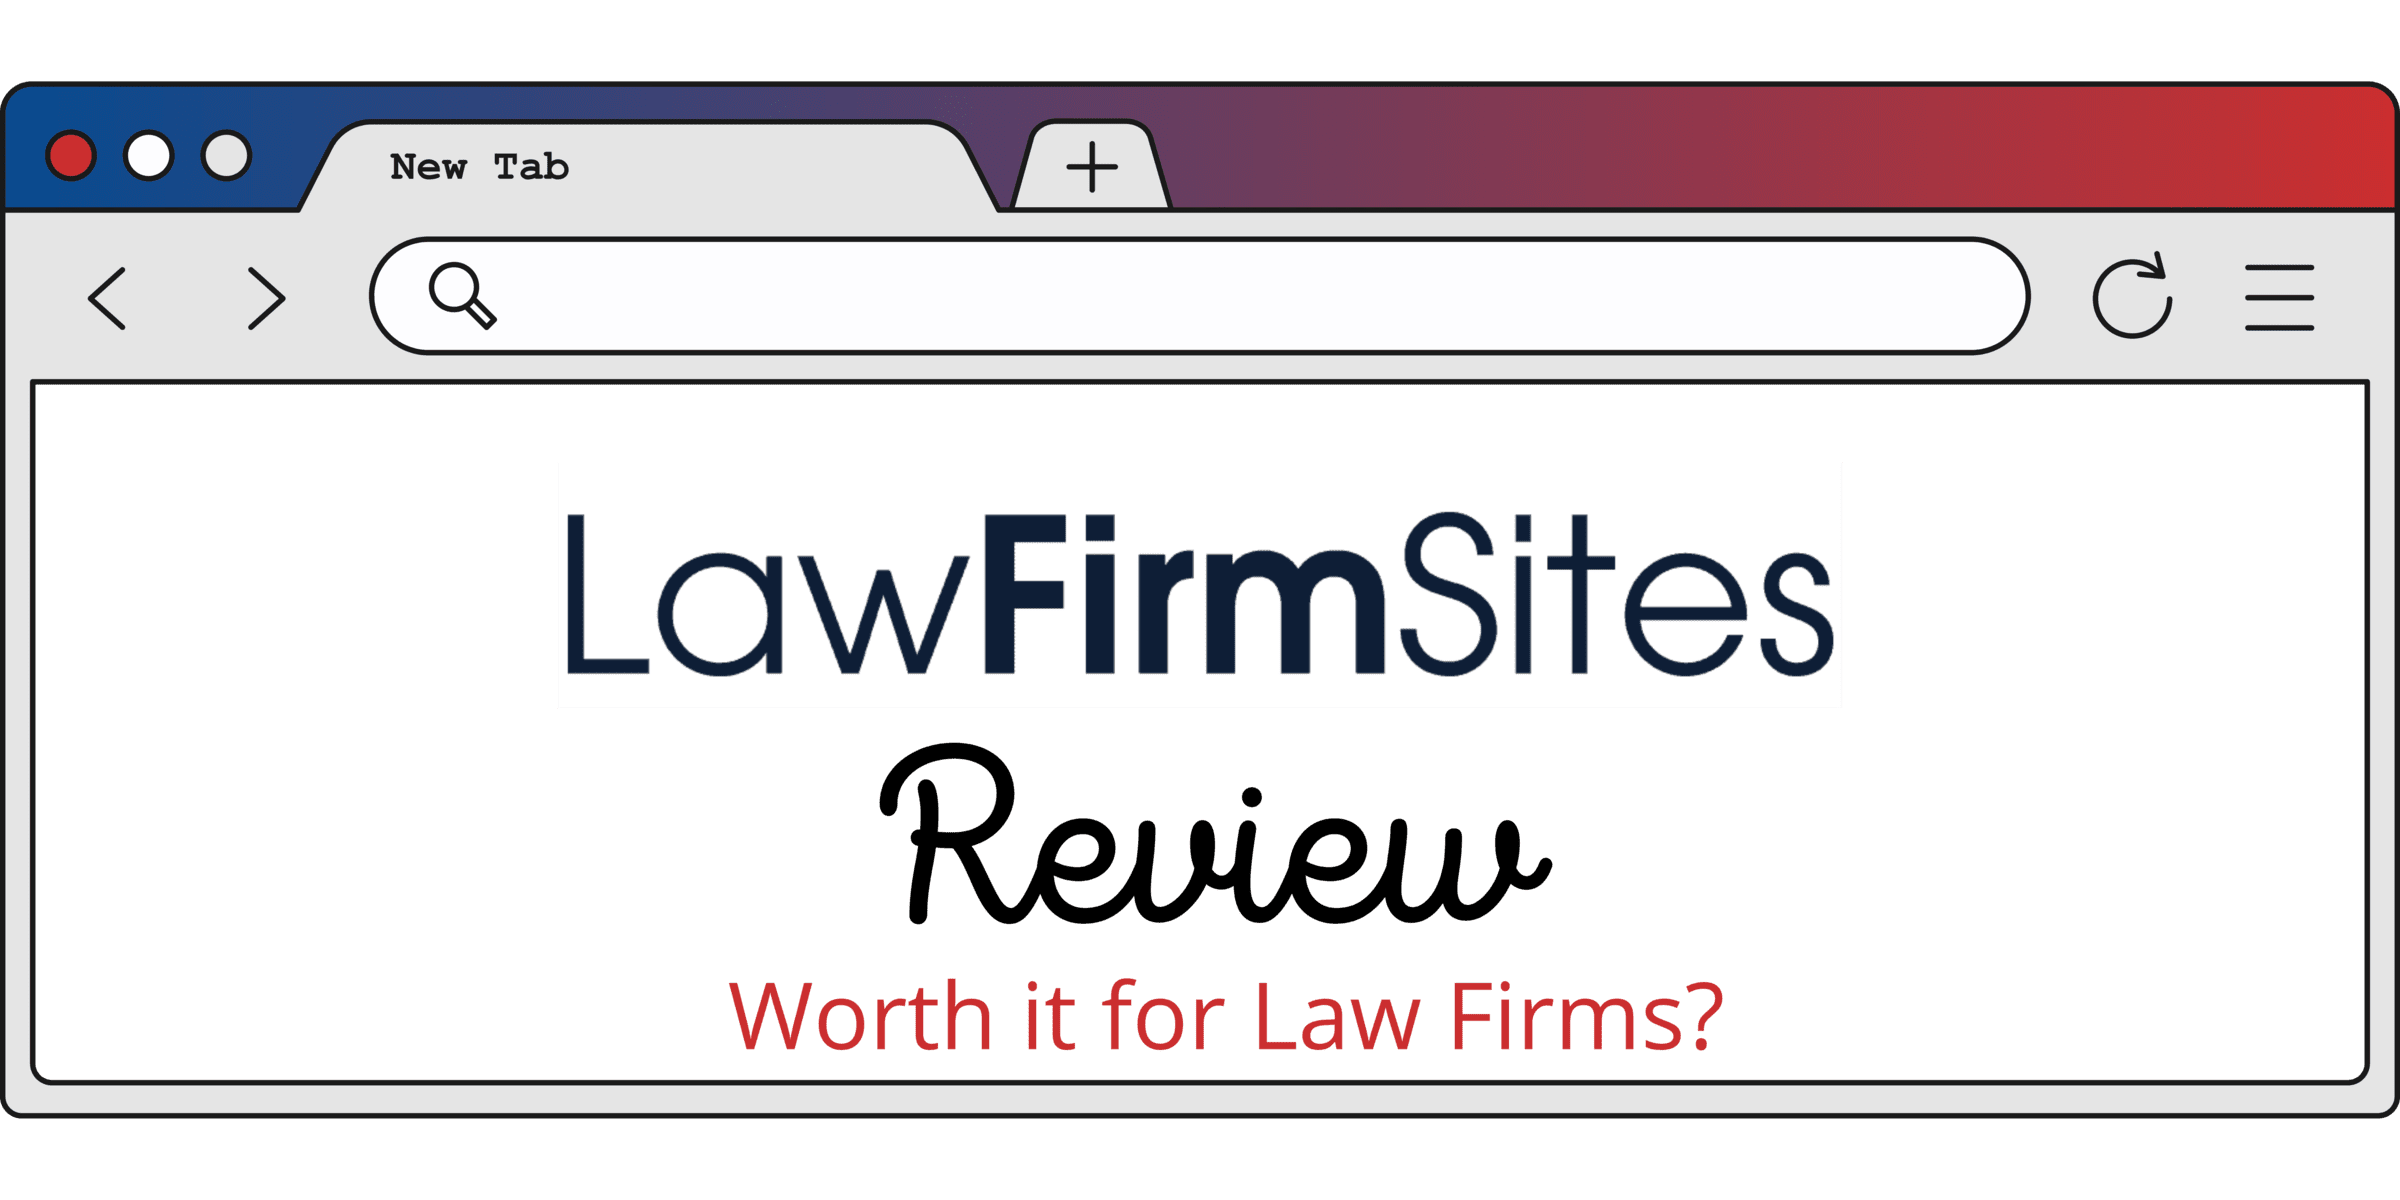 LawFirmSites Review Websites for Law Firms